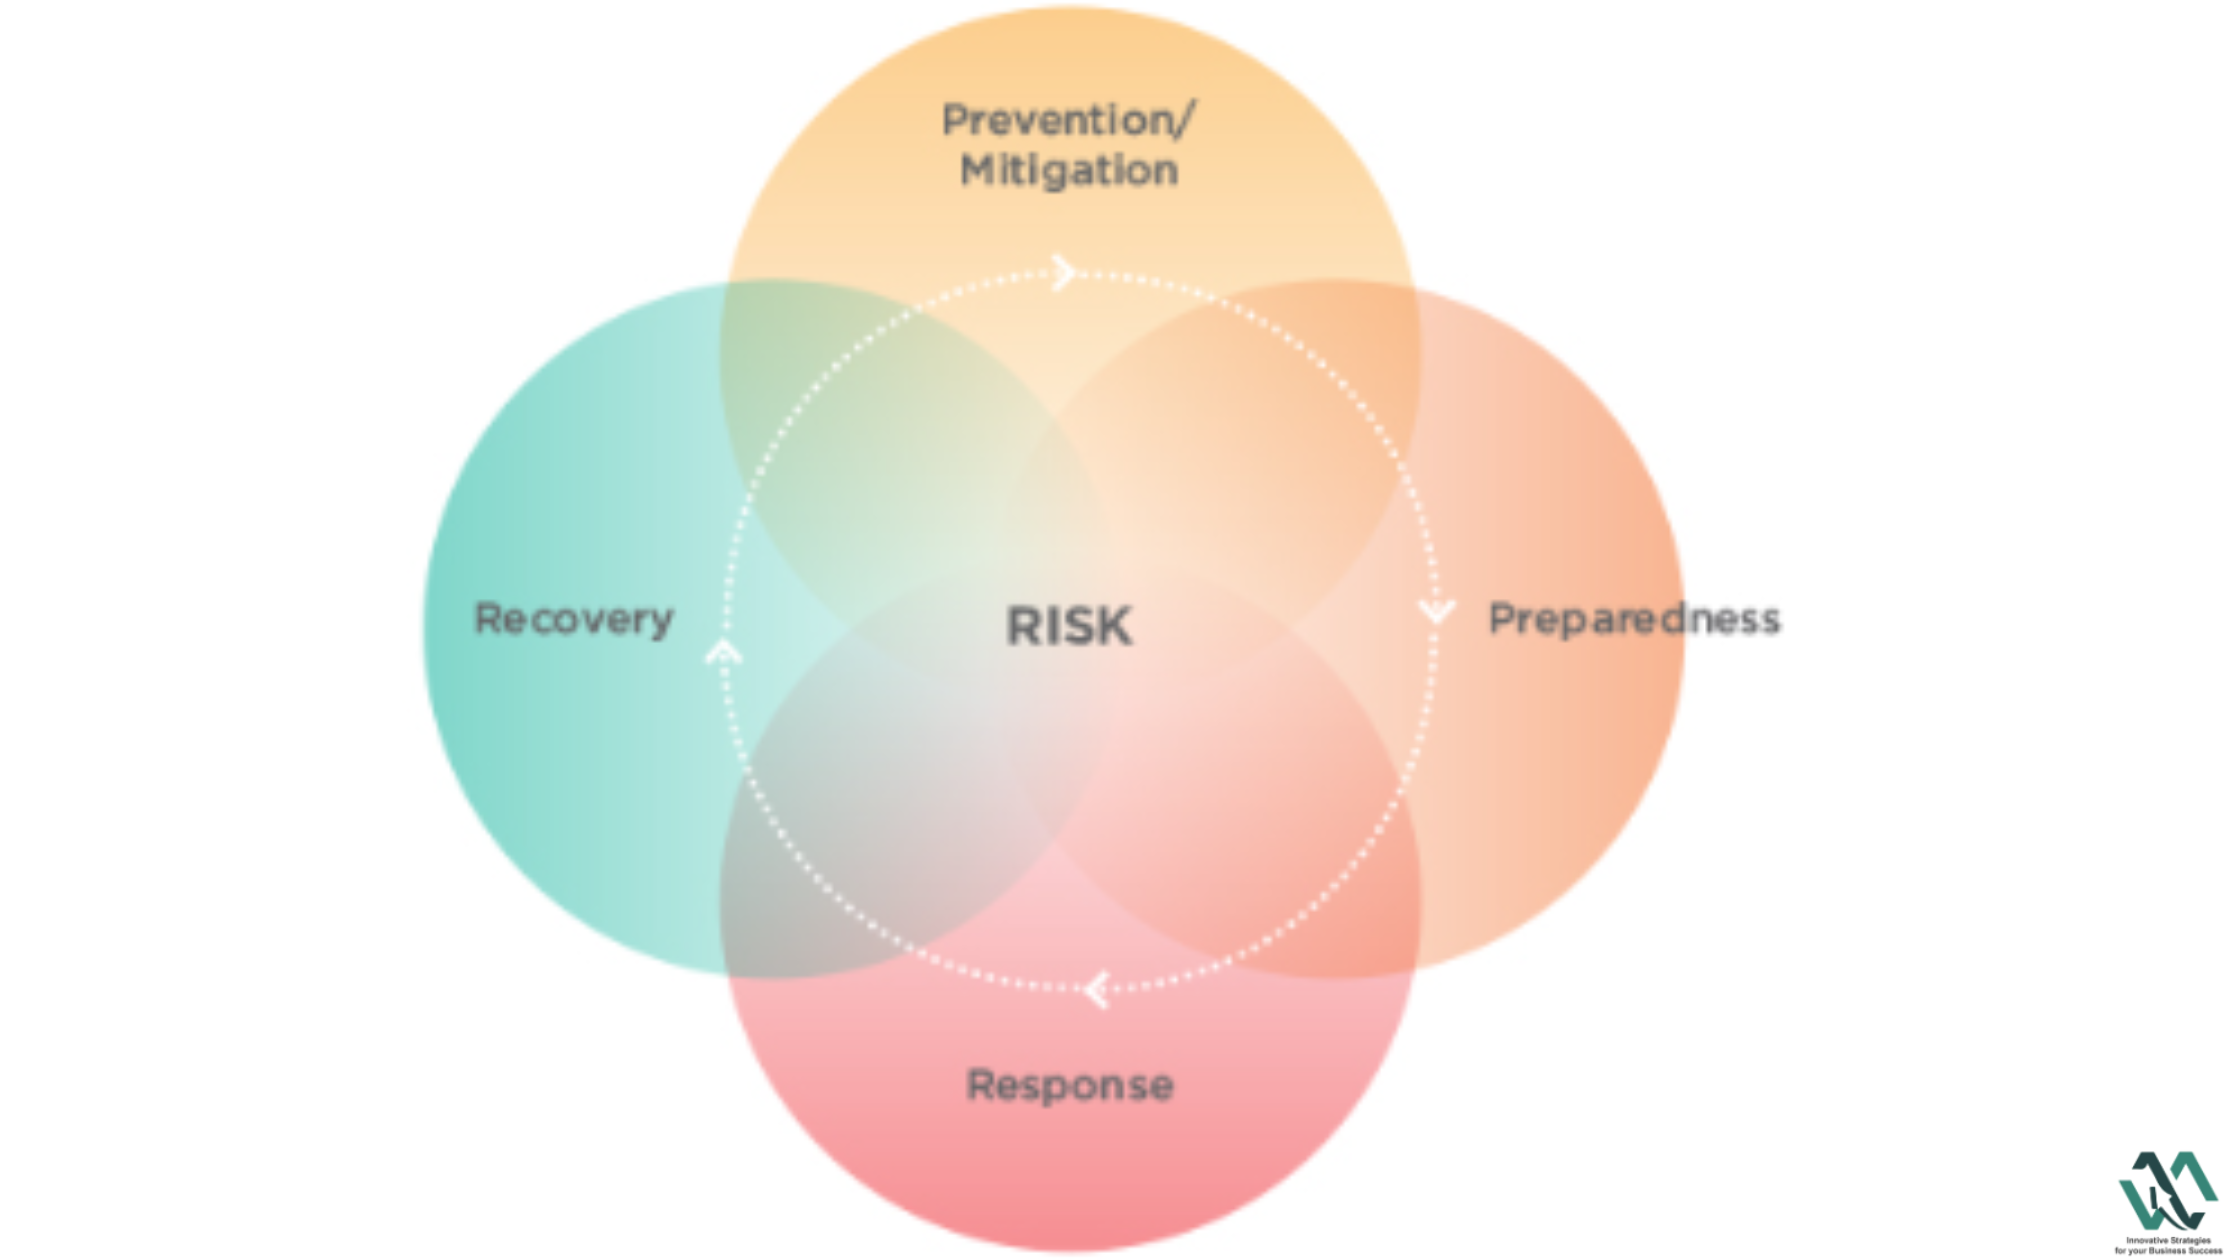  The PPRR model is a best practice for disaster risk management. 